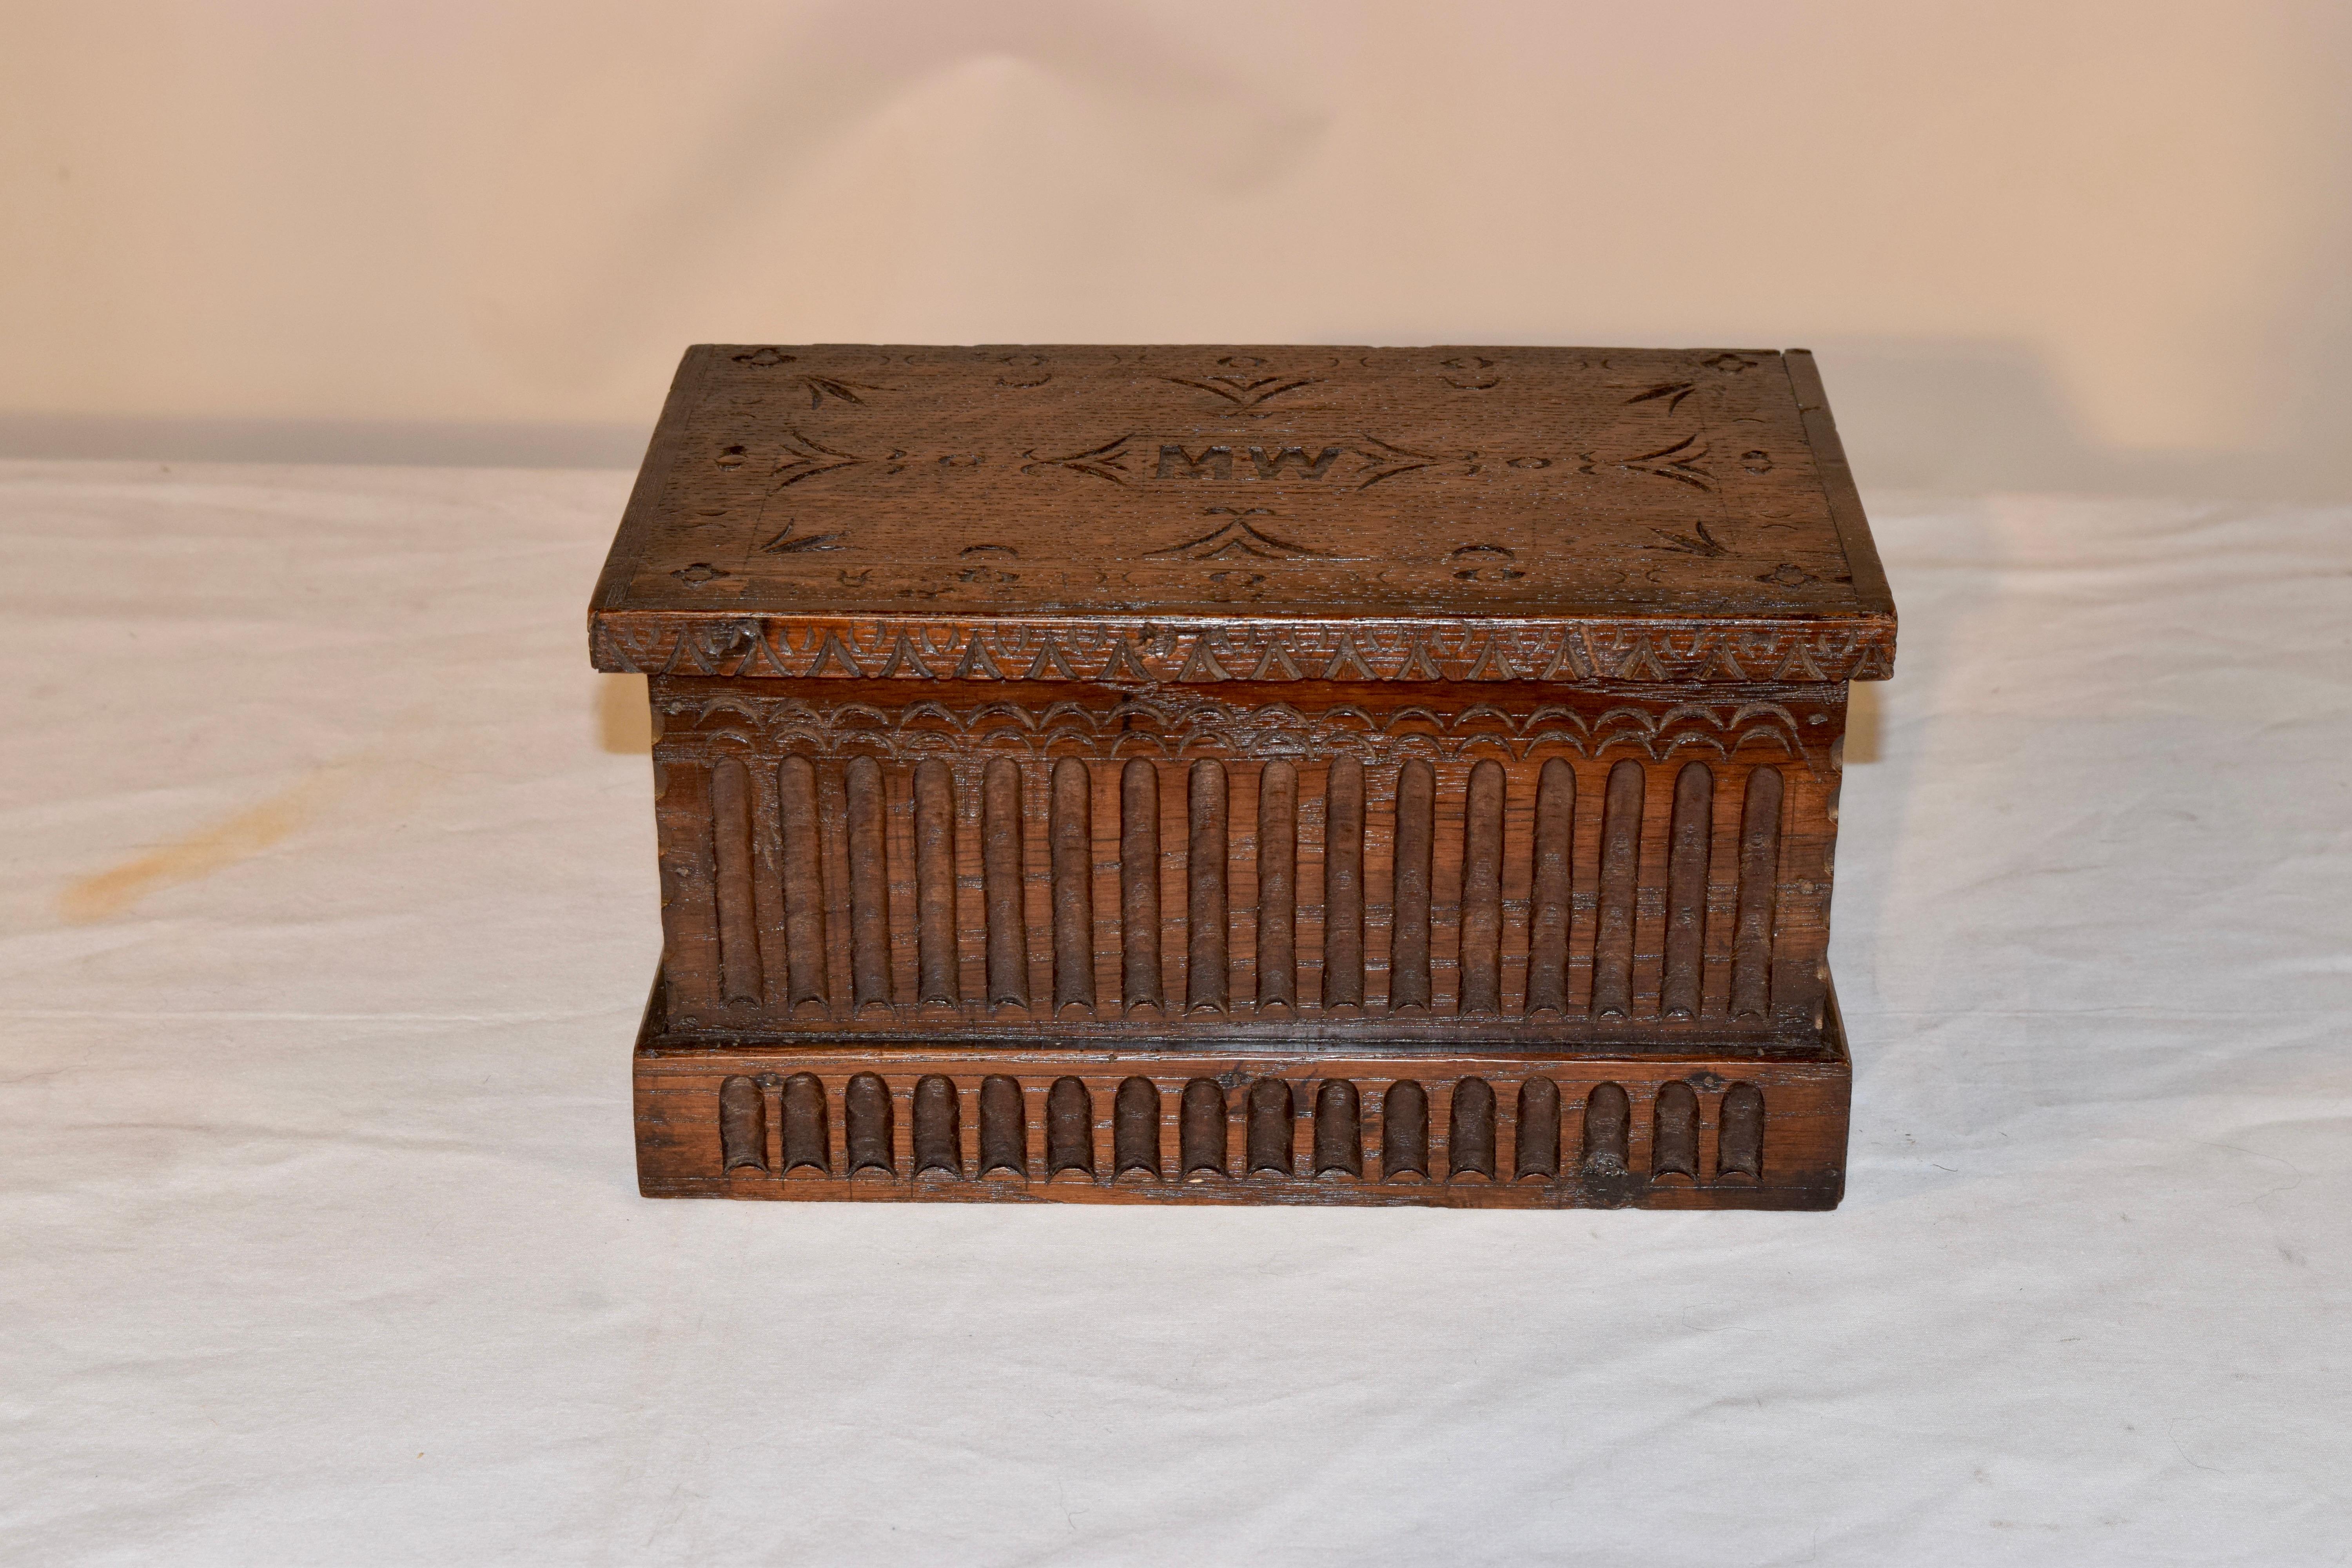 19th century oak box from England with lovely carving throughout. The box is reminiscent of a miniature blanket chest with the initials MW carved into the lid. The top opens to reveal generous storage. The sides and front have lovely nulling